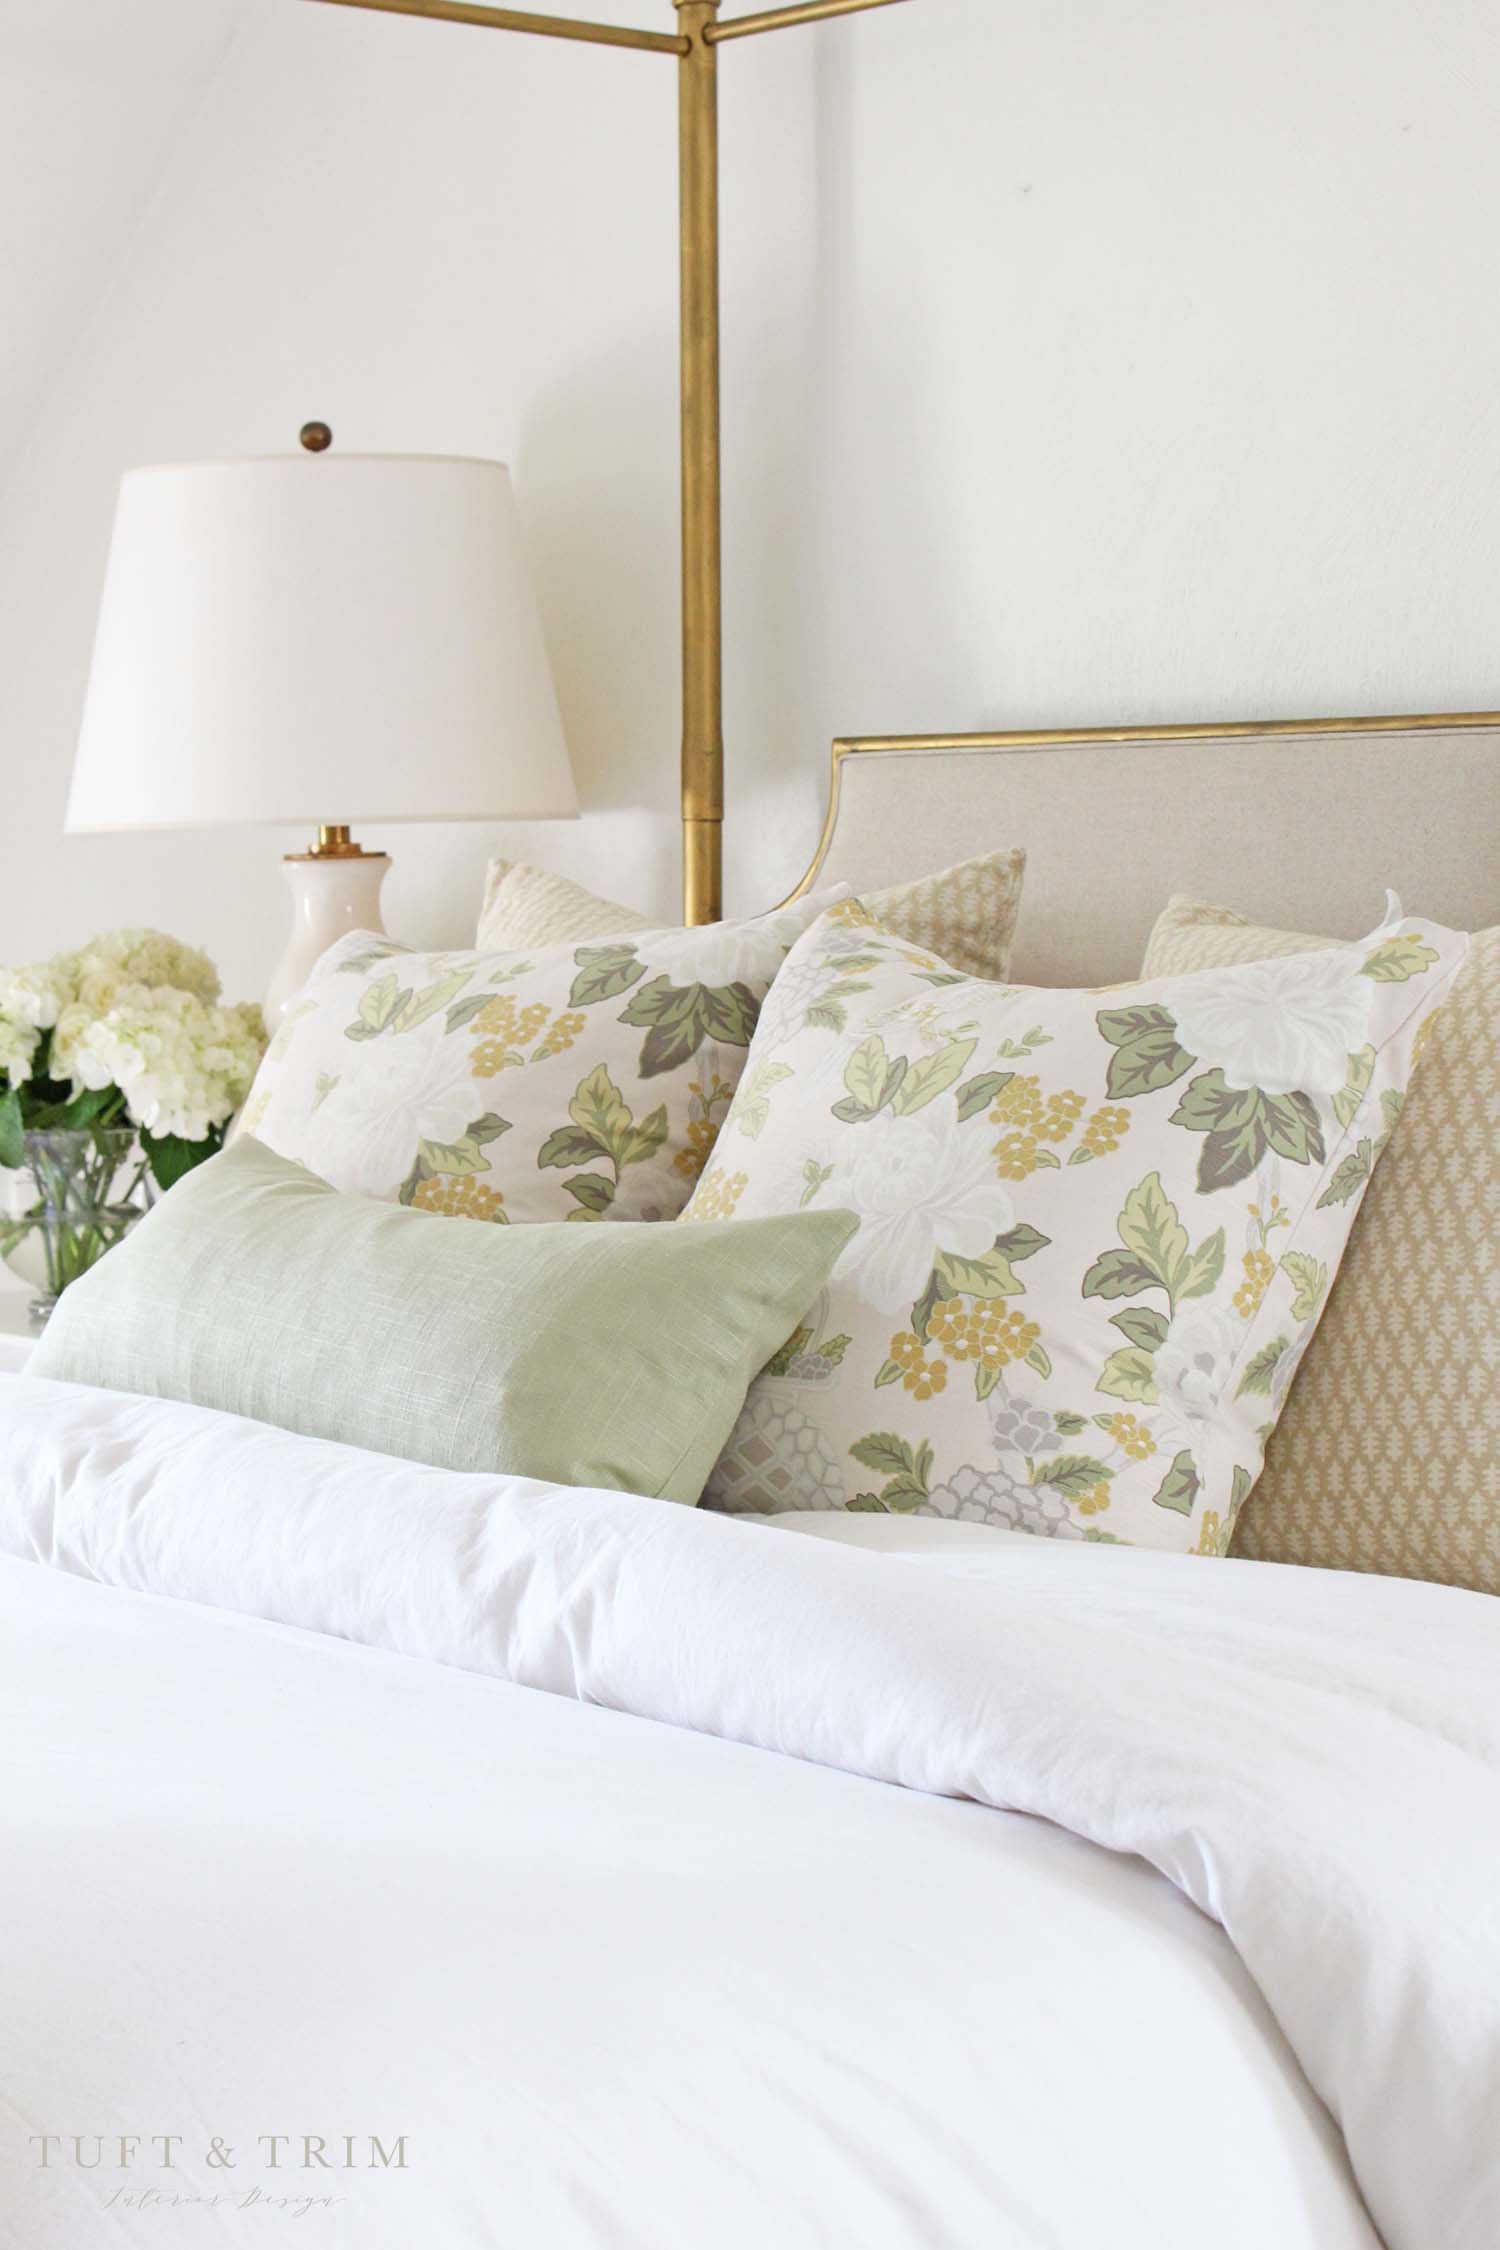 Designer Pillows & Styling Tips for Spring with Tuft & Trim Interior Design